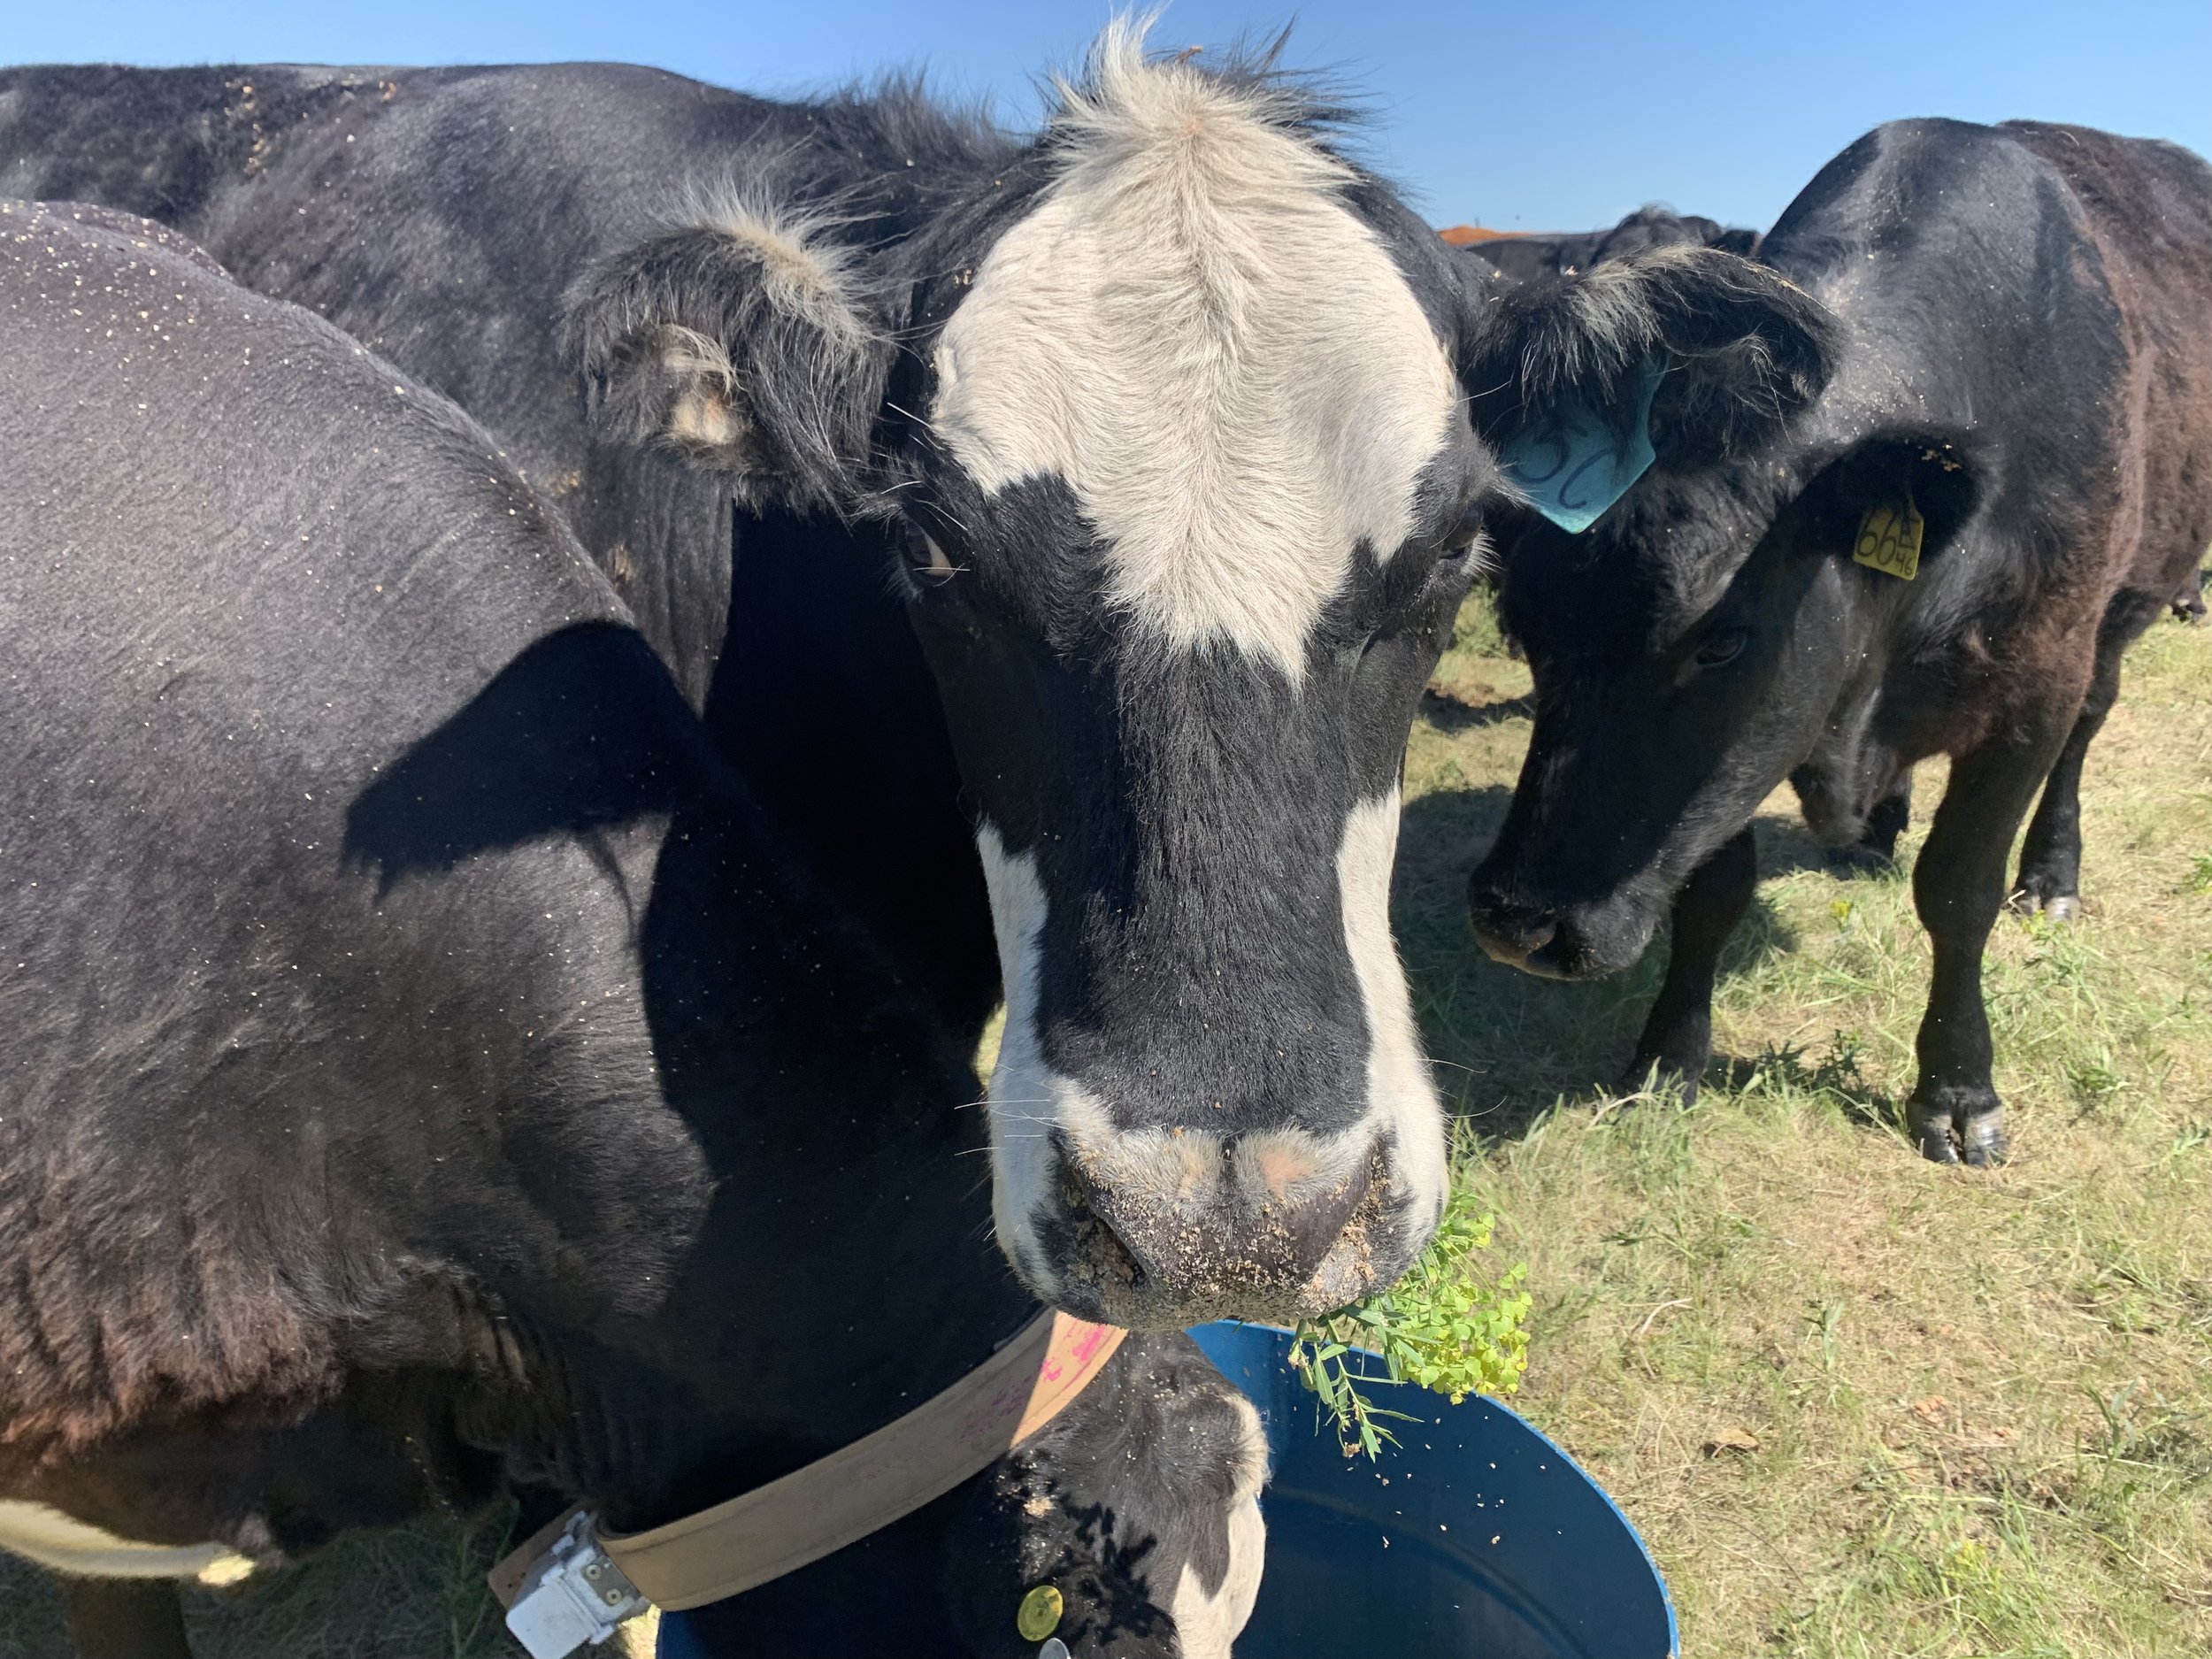 Cow eating a leafy spurge plant during training